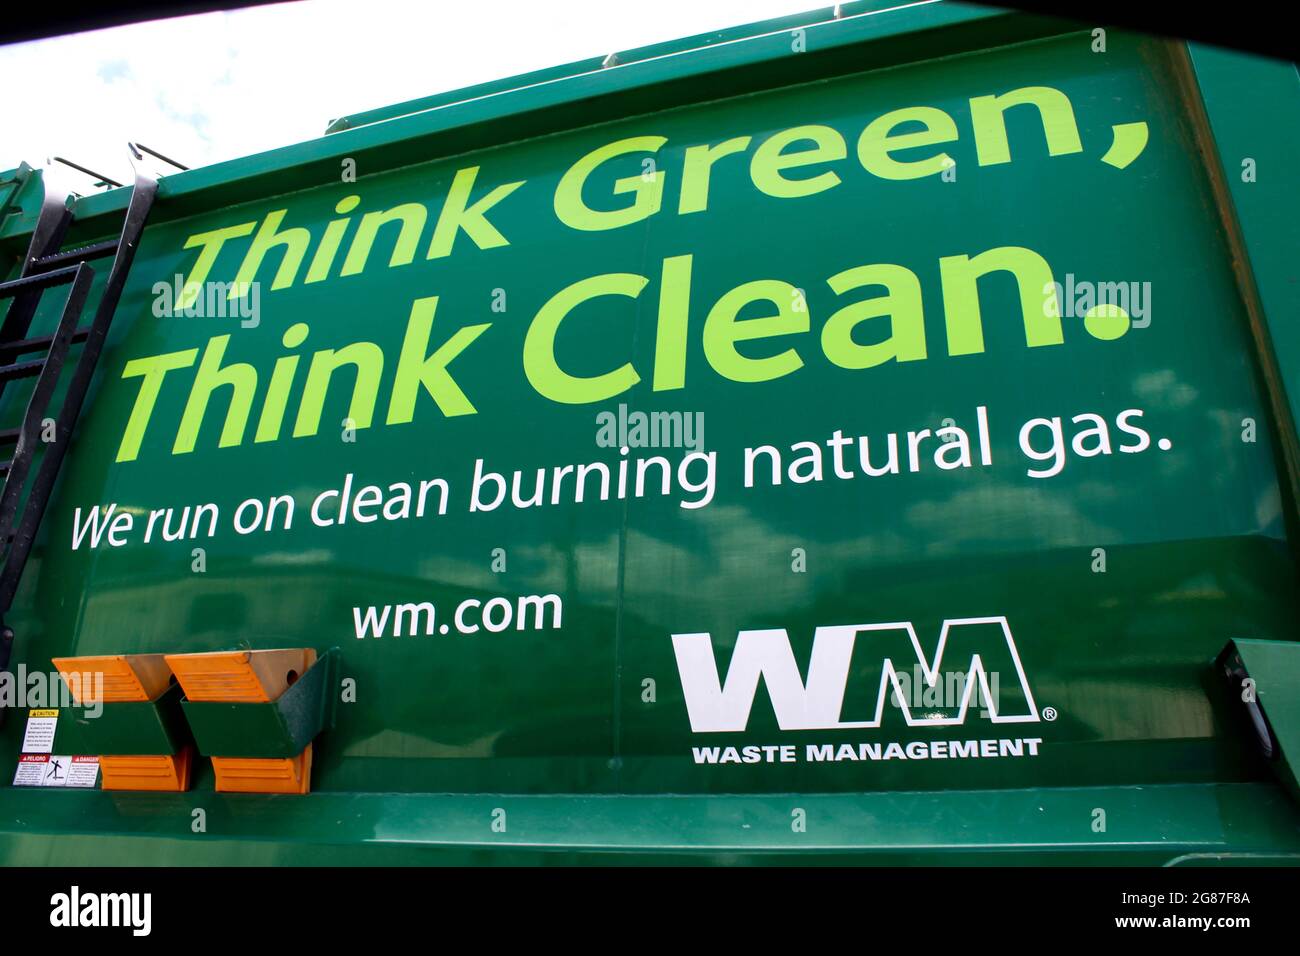 WM Waste Management, is the leading provider of comprehensive waste management, offering services such as garbage collection and disposal, recycling Stock Photo